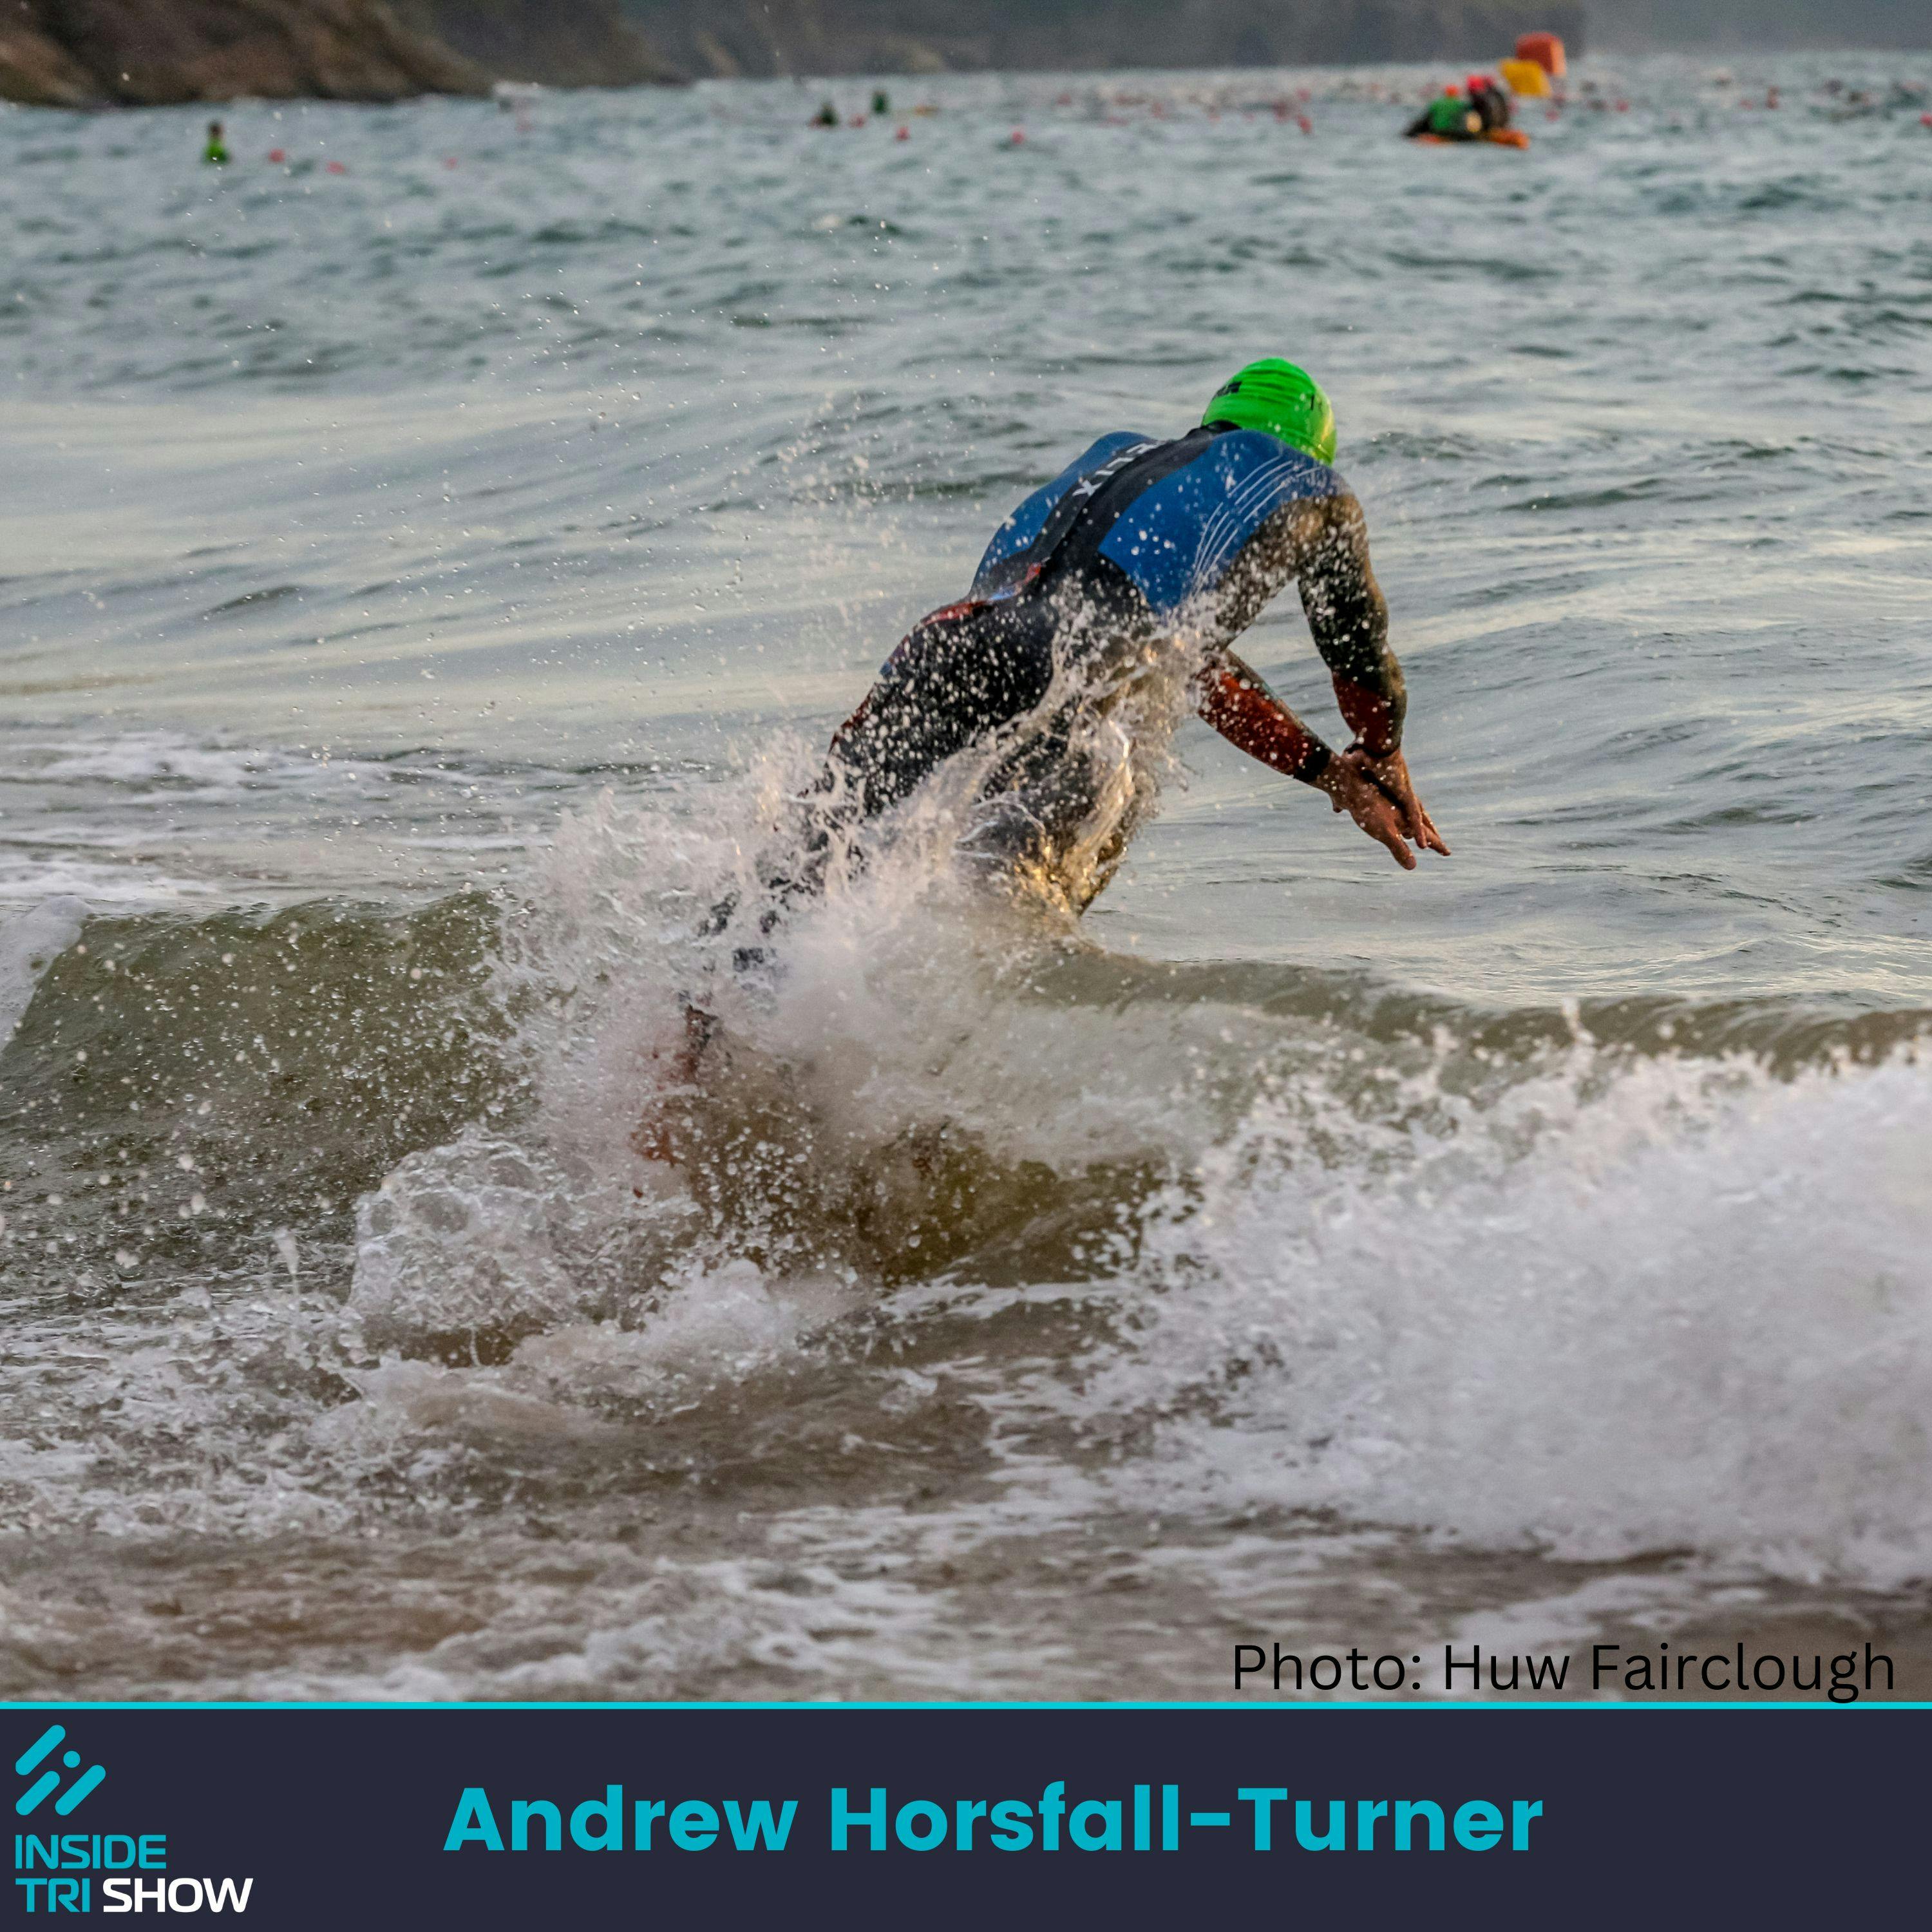 Andrew Horsfall-Turner: First out the water